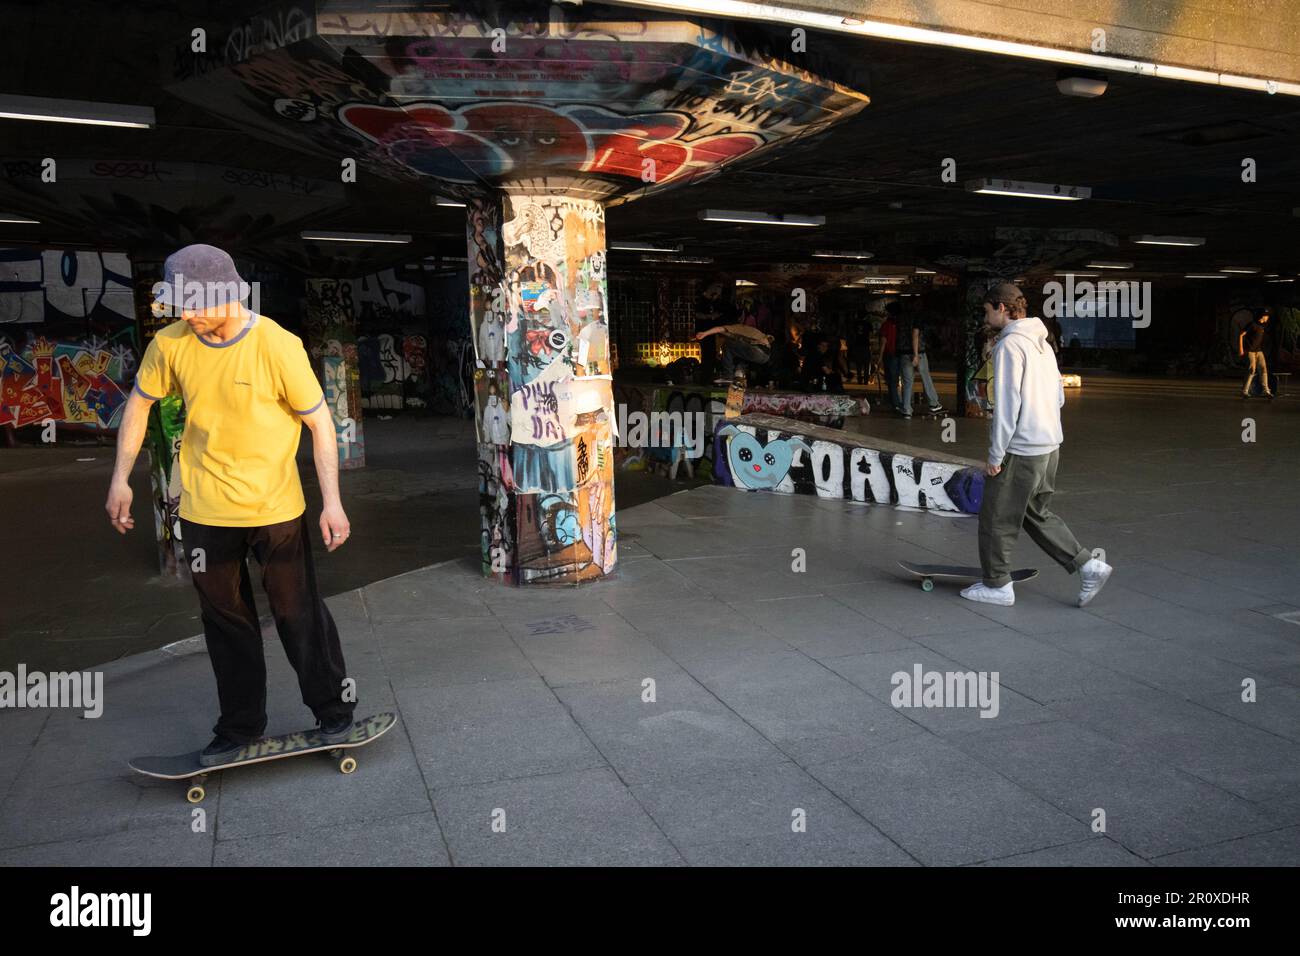 Southbank Skate Space, The undercroft of the Southbank Centre widely recognised as the birthplace of British skateboarding, London, England, UK Stock Photo